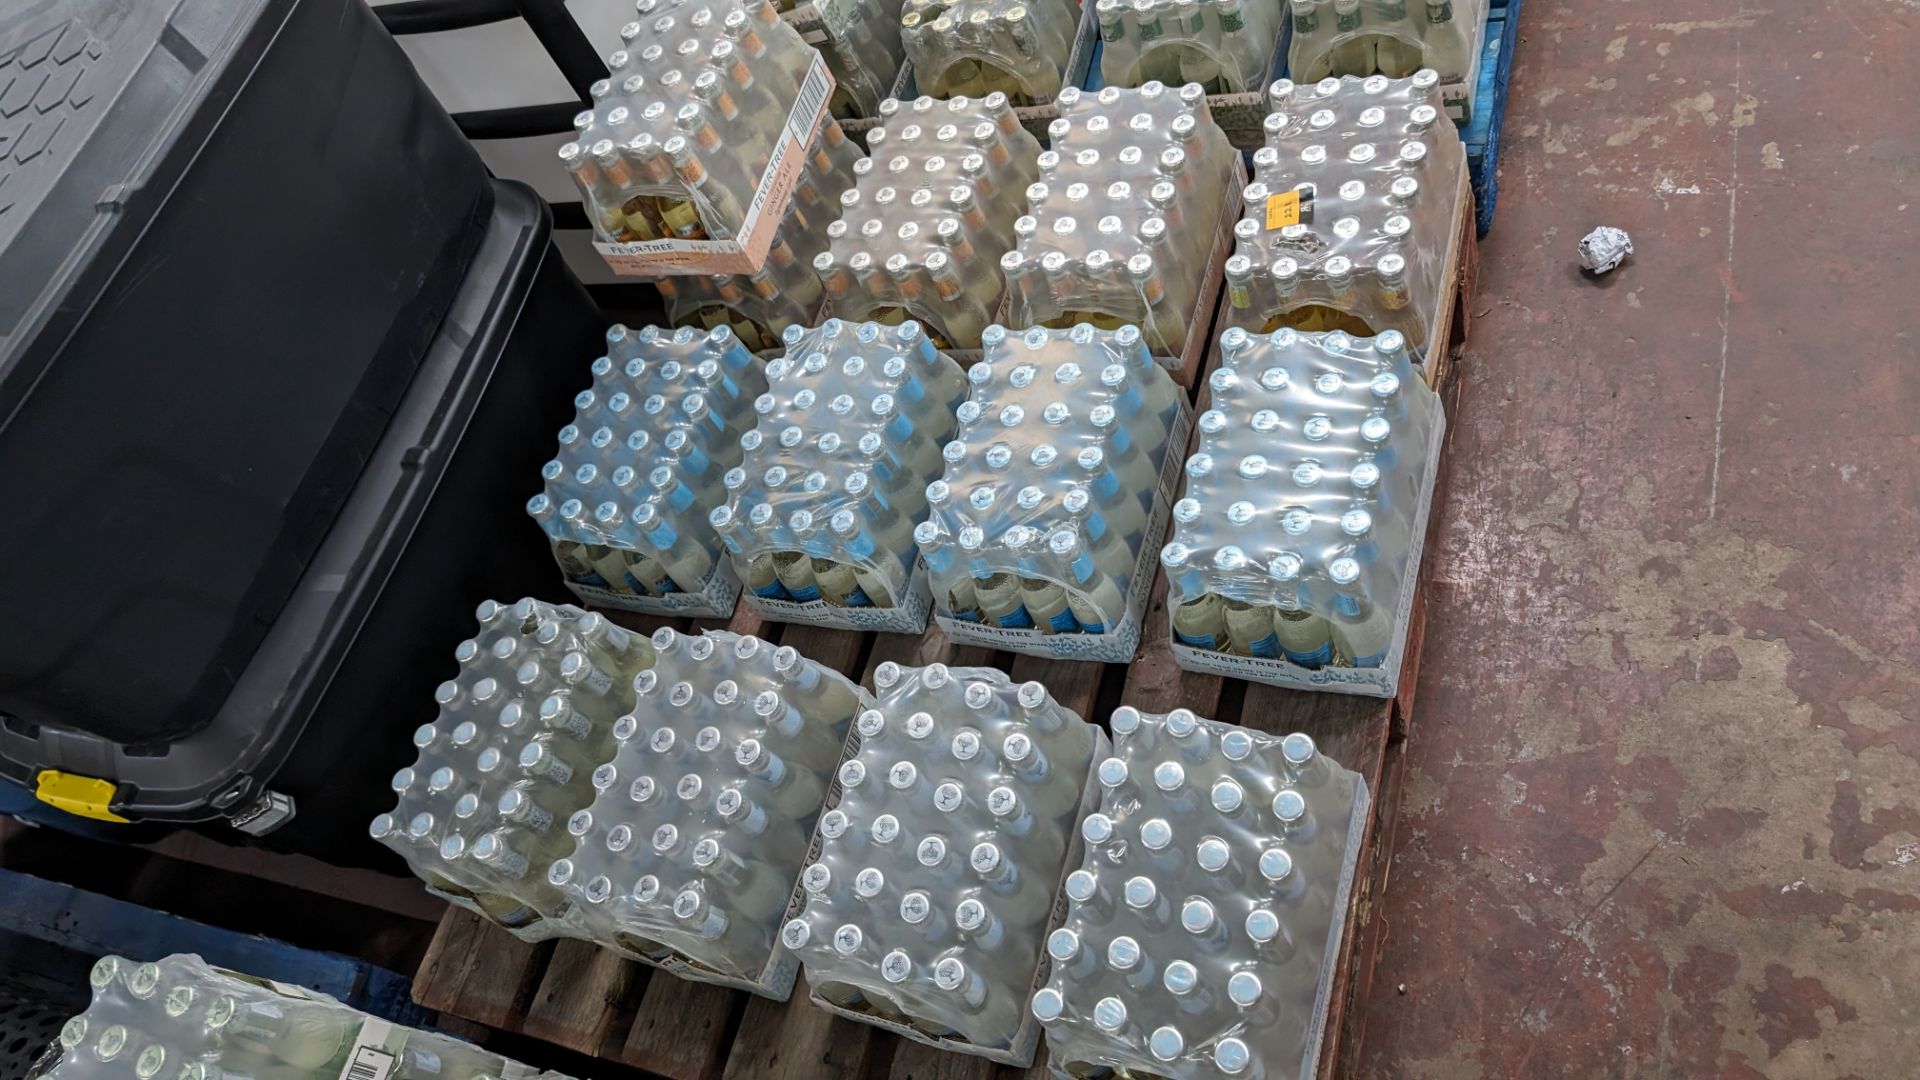 The contents of a pallet of Fever-Tree tonic water comprising 13 trays. NB: The Fever-Tree tonic w - Image 6 of 6